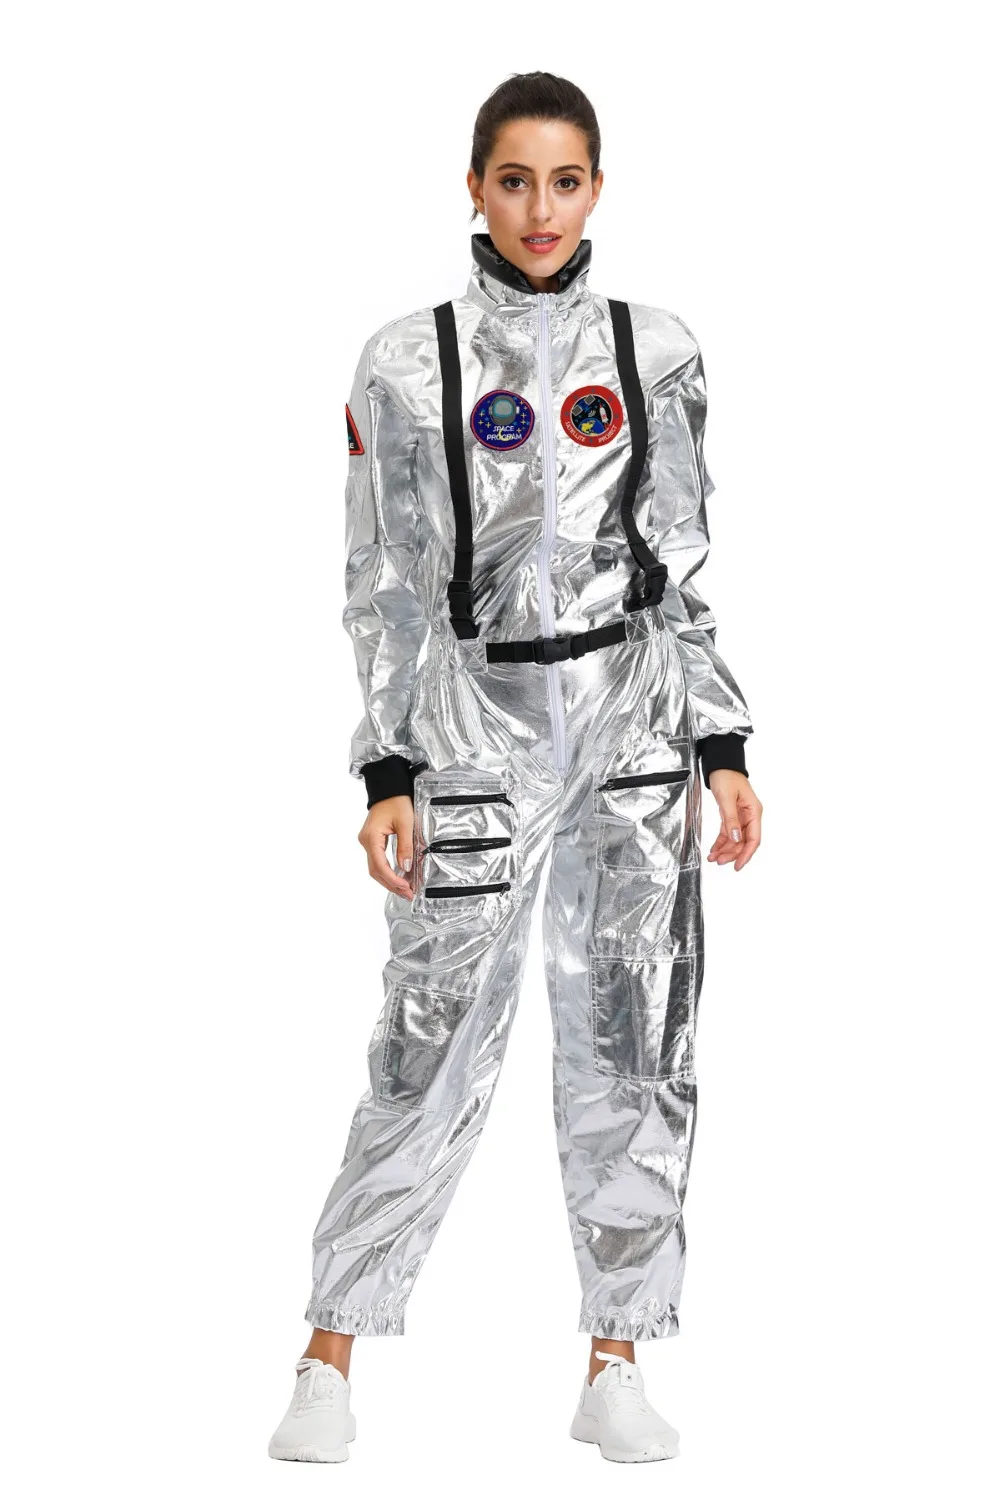 Men Astronaut Alien Spaceman Cosplay Halloween Costumes Carnival Party Adult Women Pilots Outfits Group Couple Matching Clothes